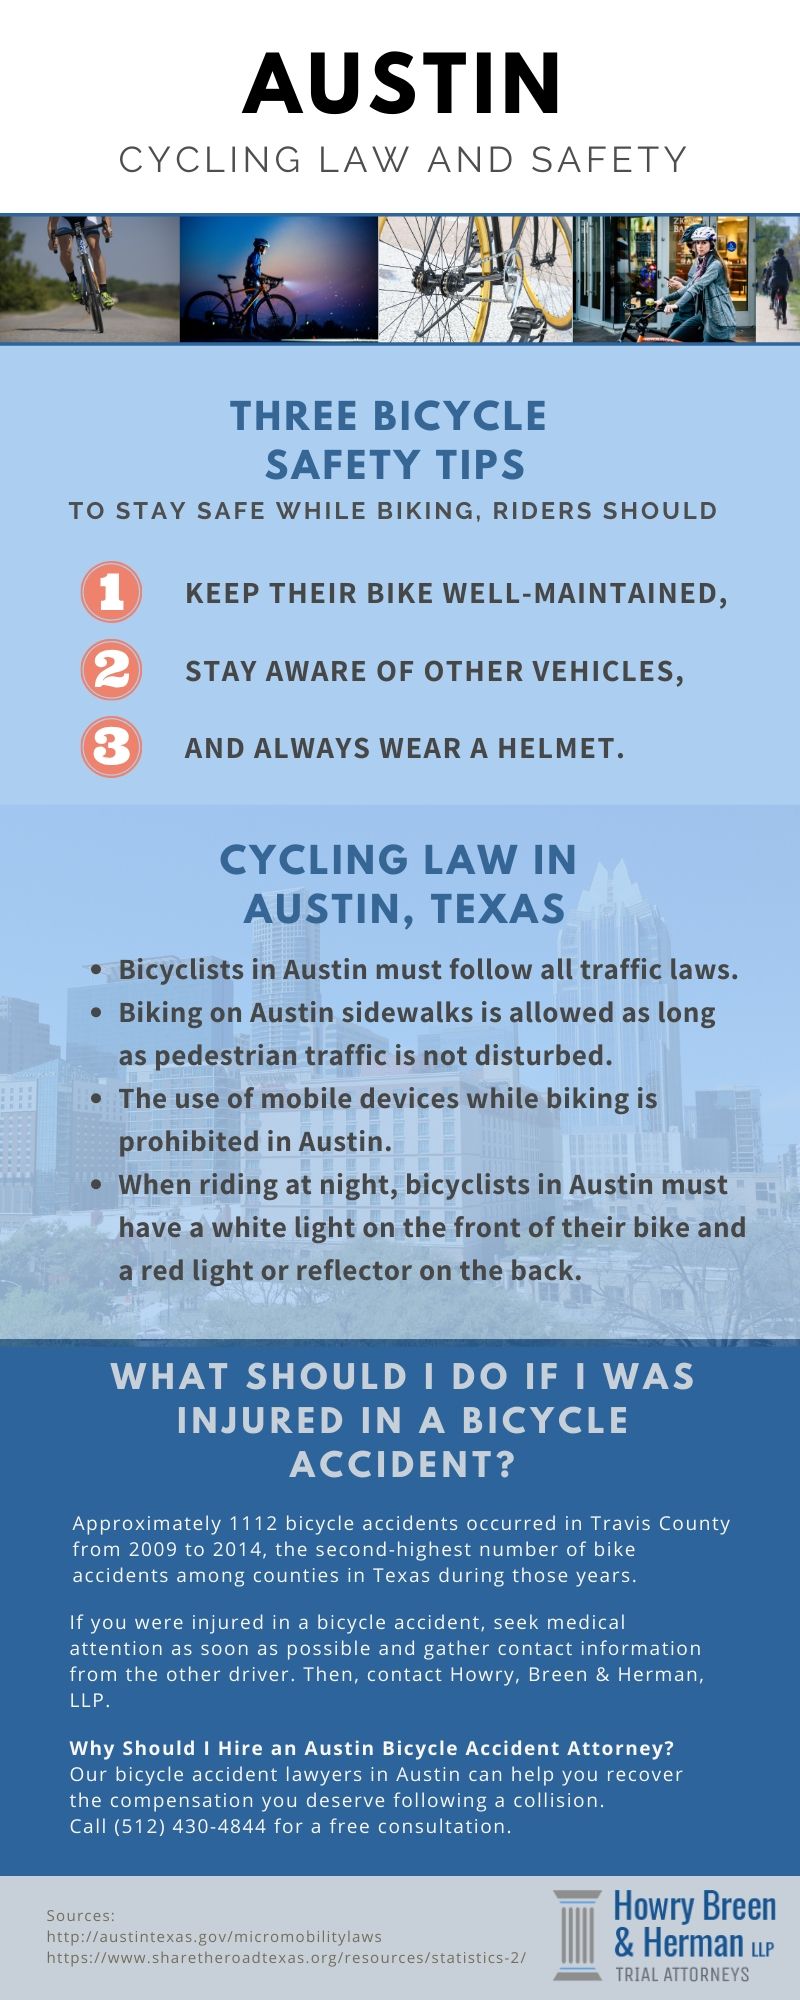 Graphic showing the following three topics: bicycle safety tips (keeping bikes well-maintained, staying aware of other vehicles and always wearing a helmet), cycling law in Austin (such as following the traffic laws and biking on sidewalks) and what to do after a bicycle accident.